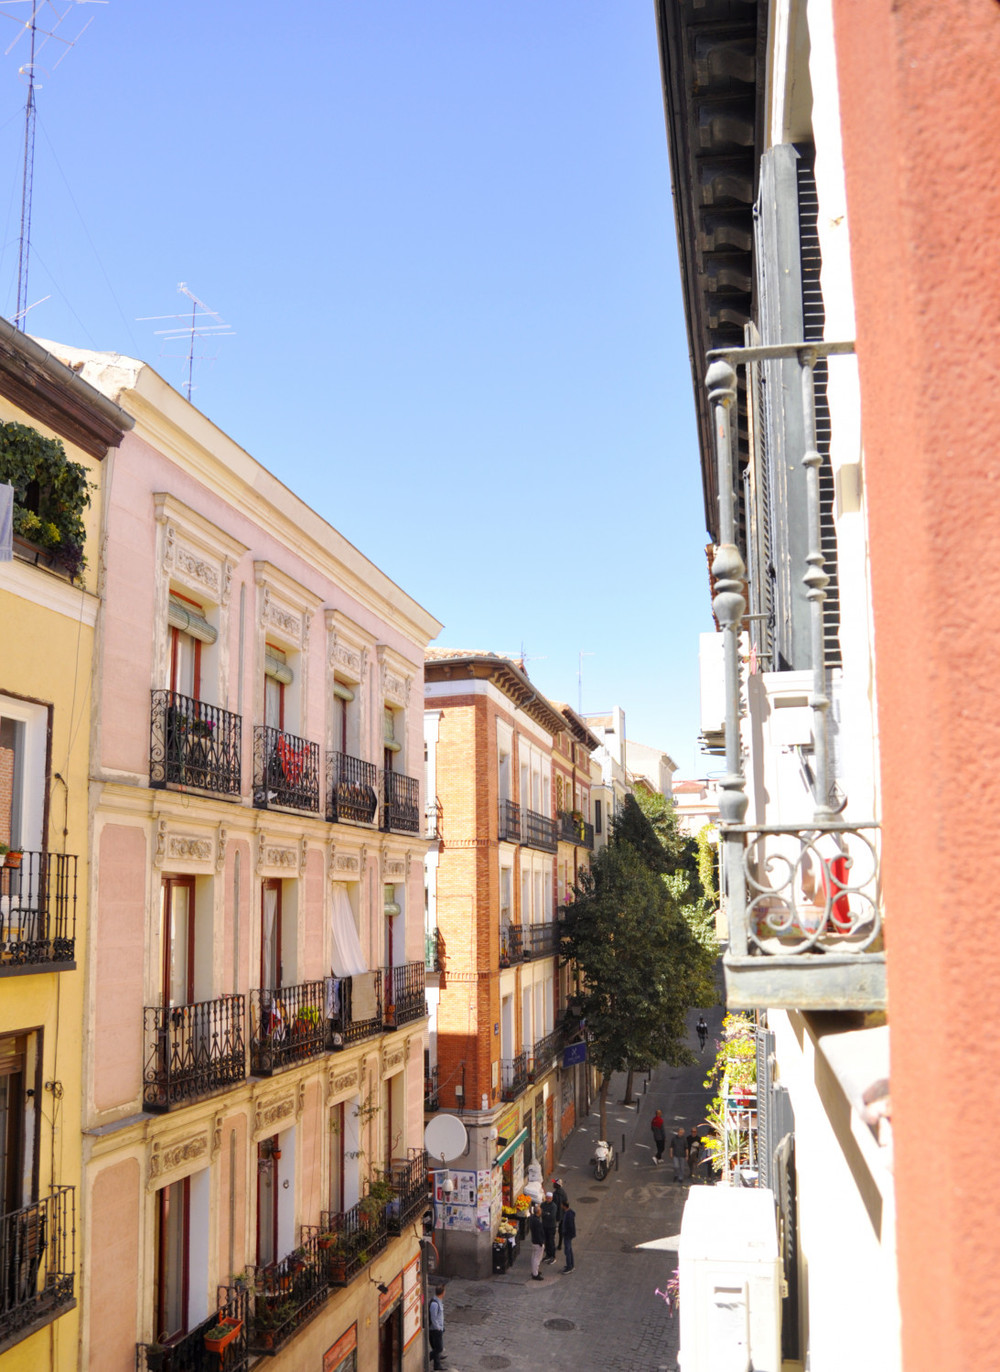 Sunny 2 bedroom flat in the centre of Madrid. A/C